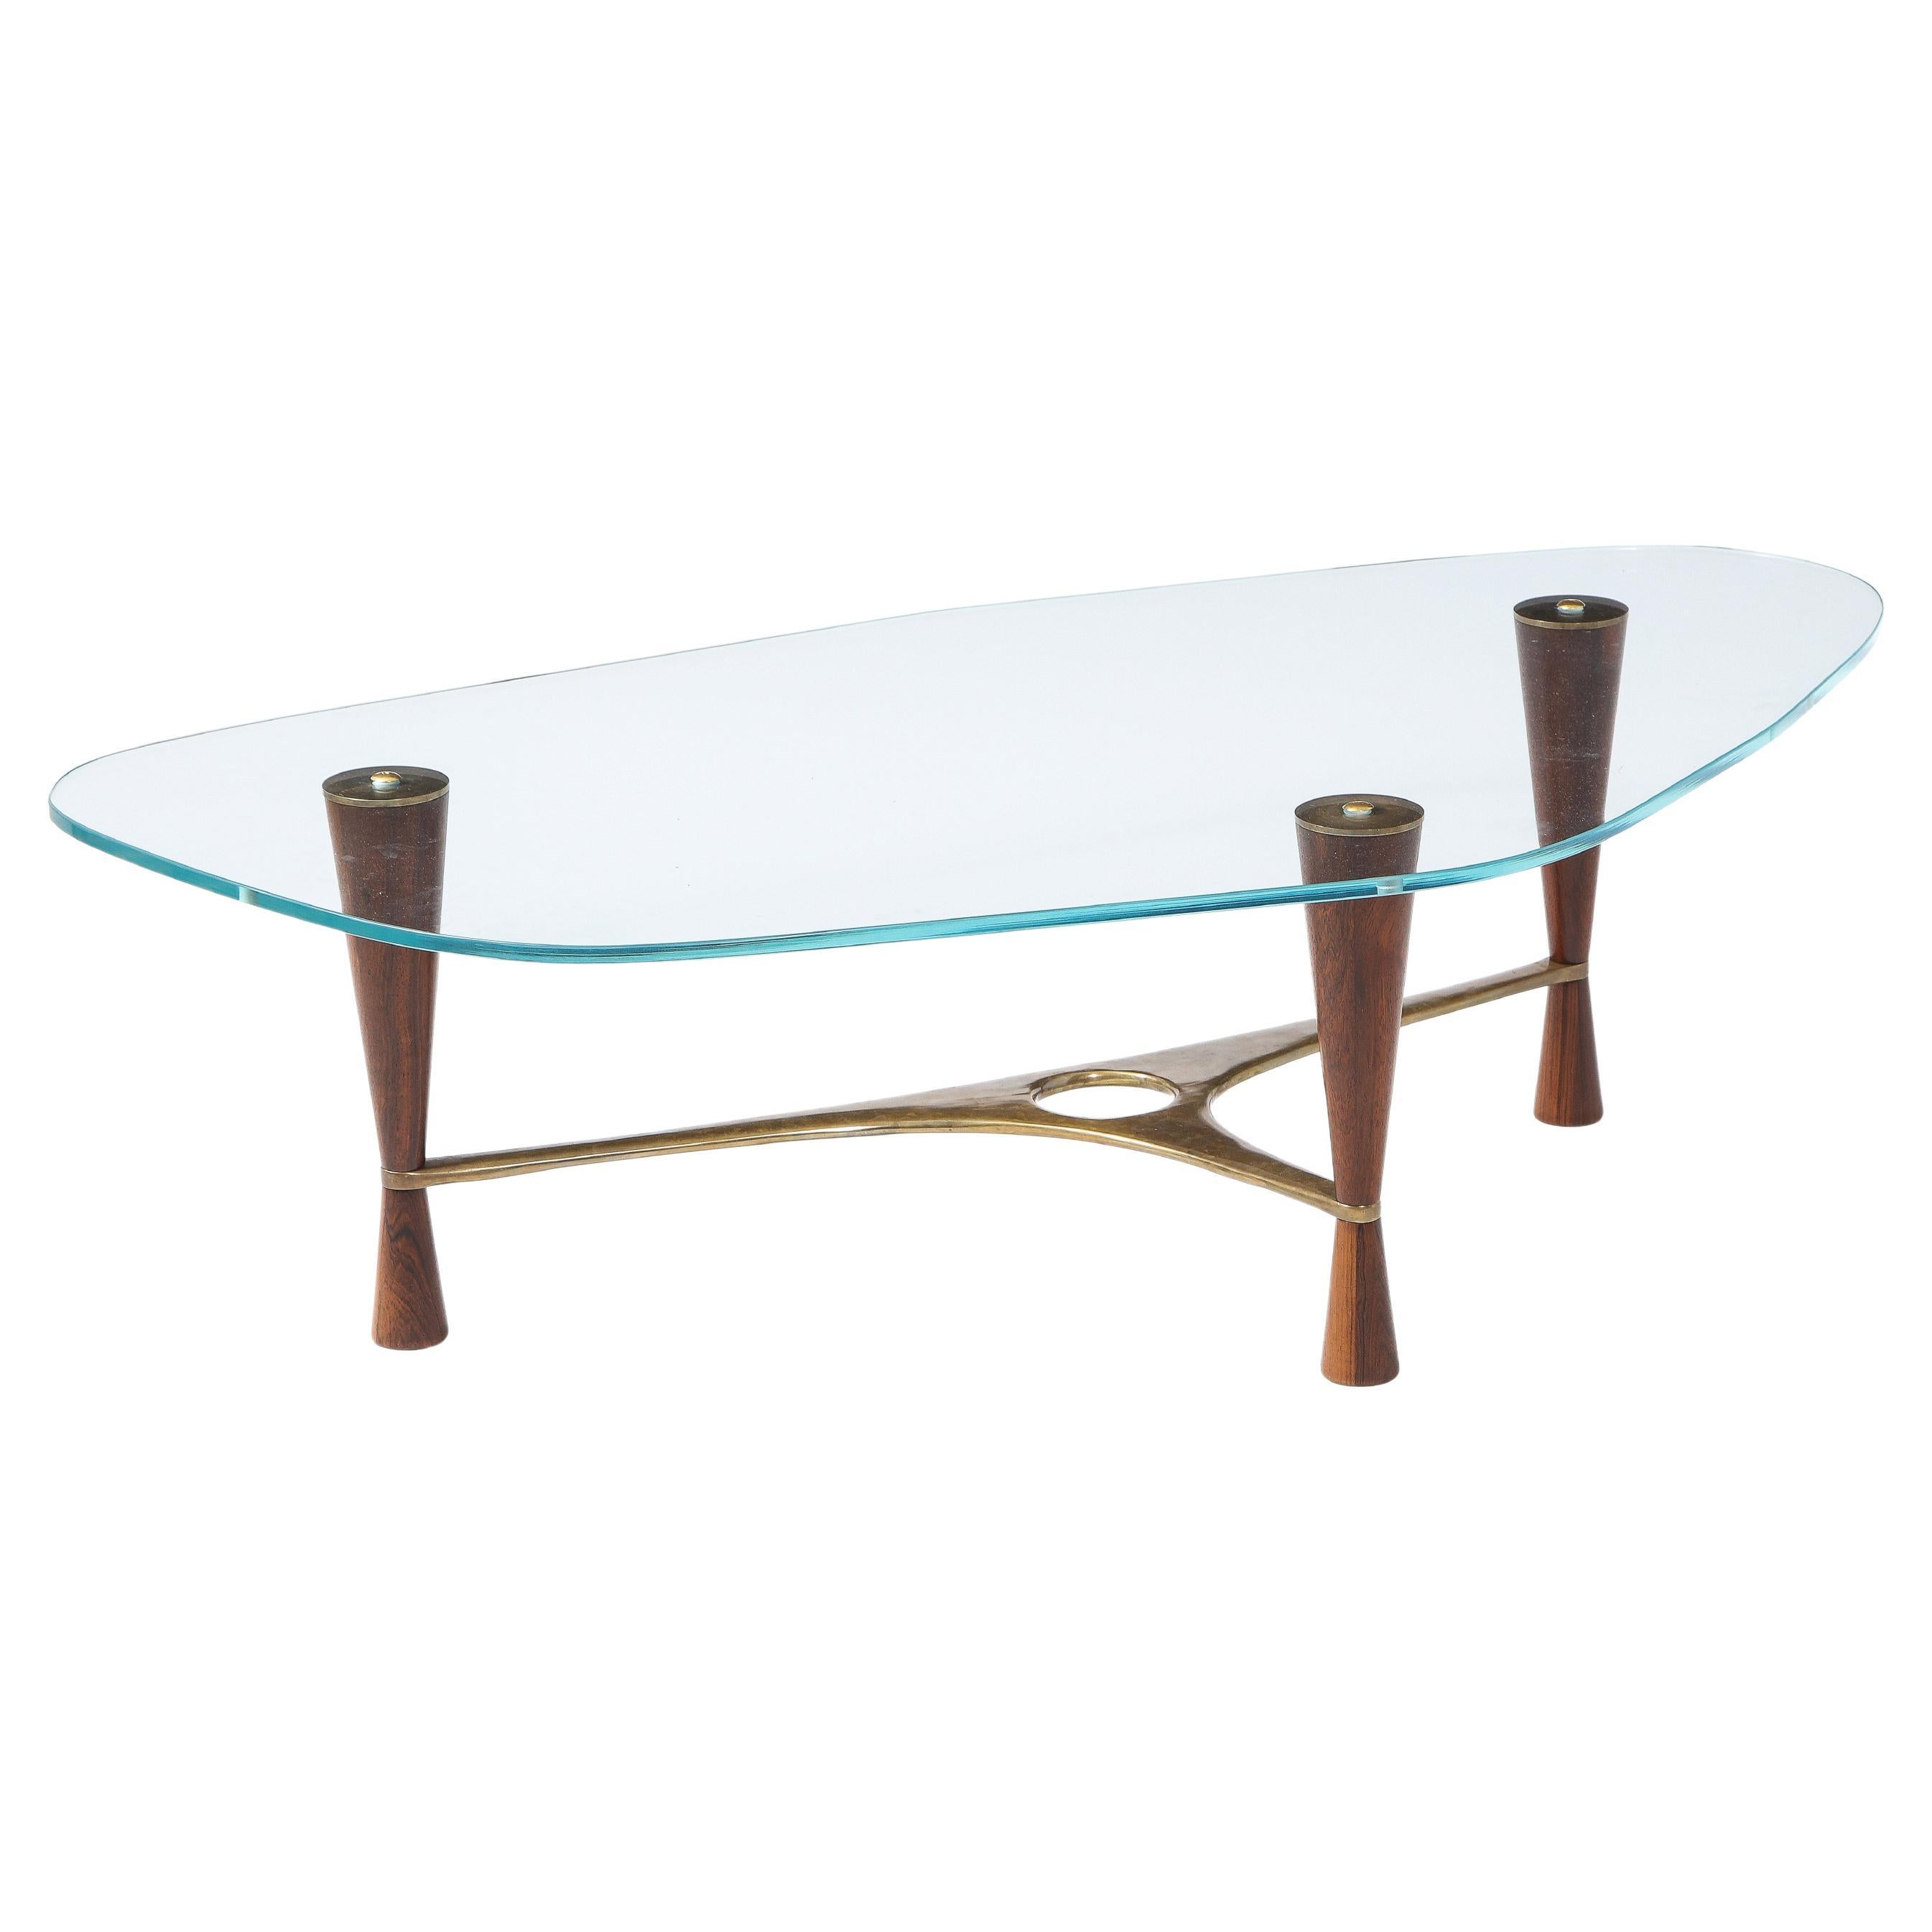 Glass "Low" Table by Edward Wormley, Manufactured by Dunbar, USA 1950's